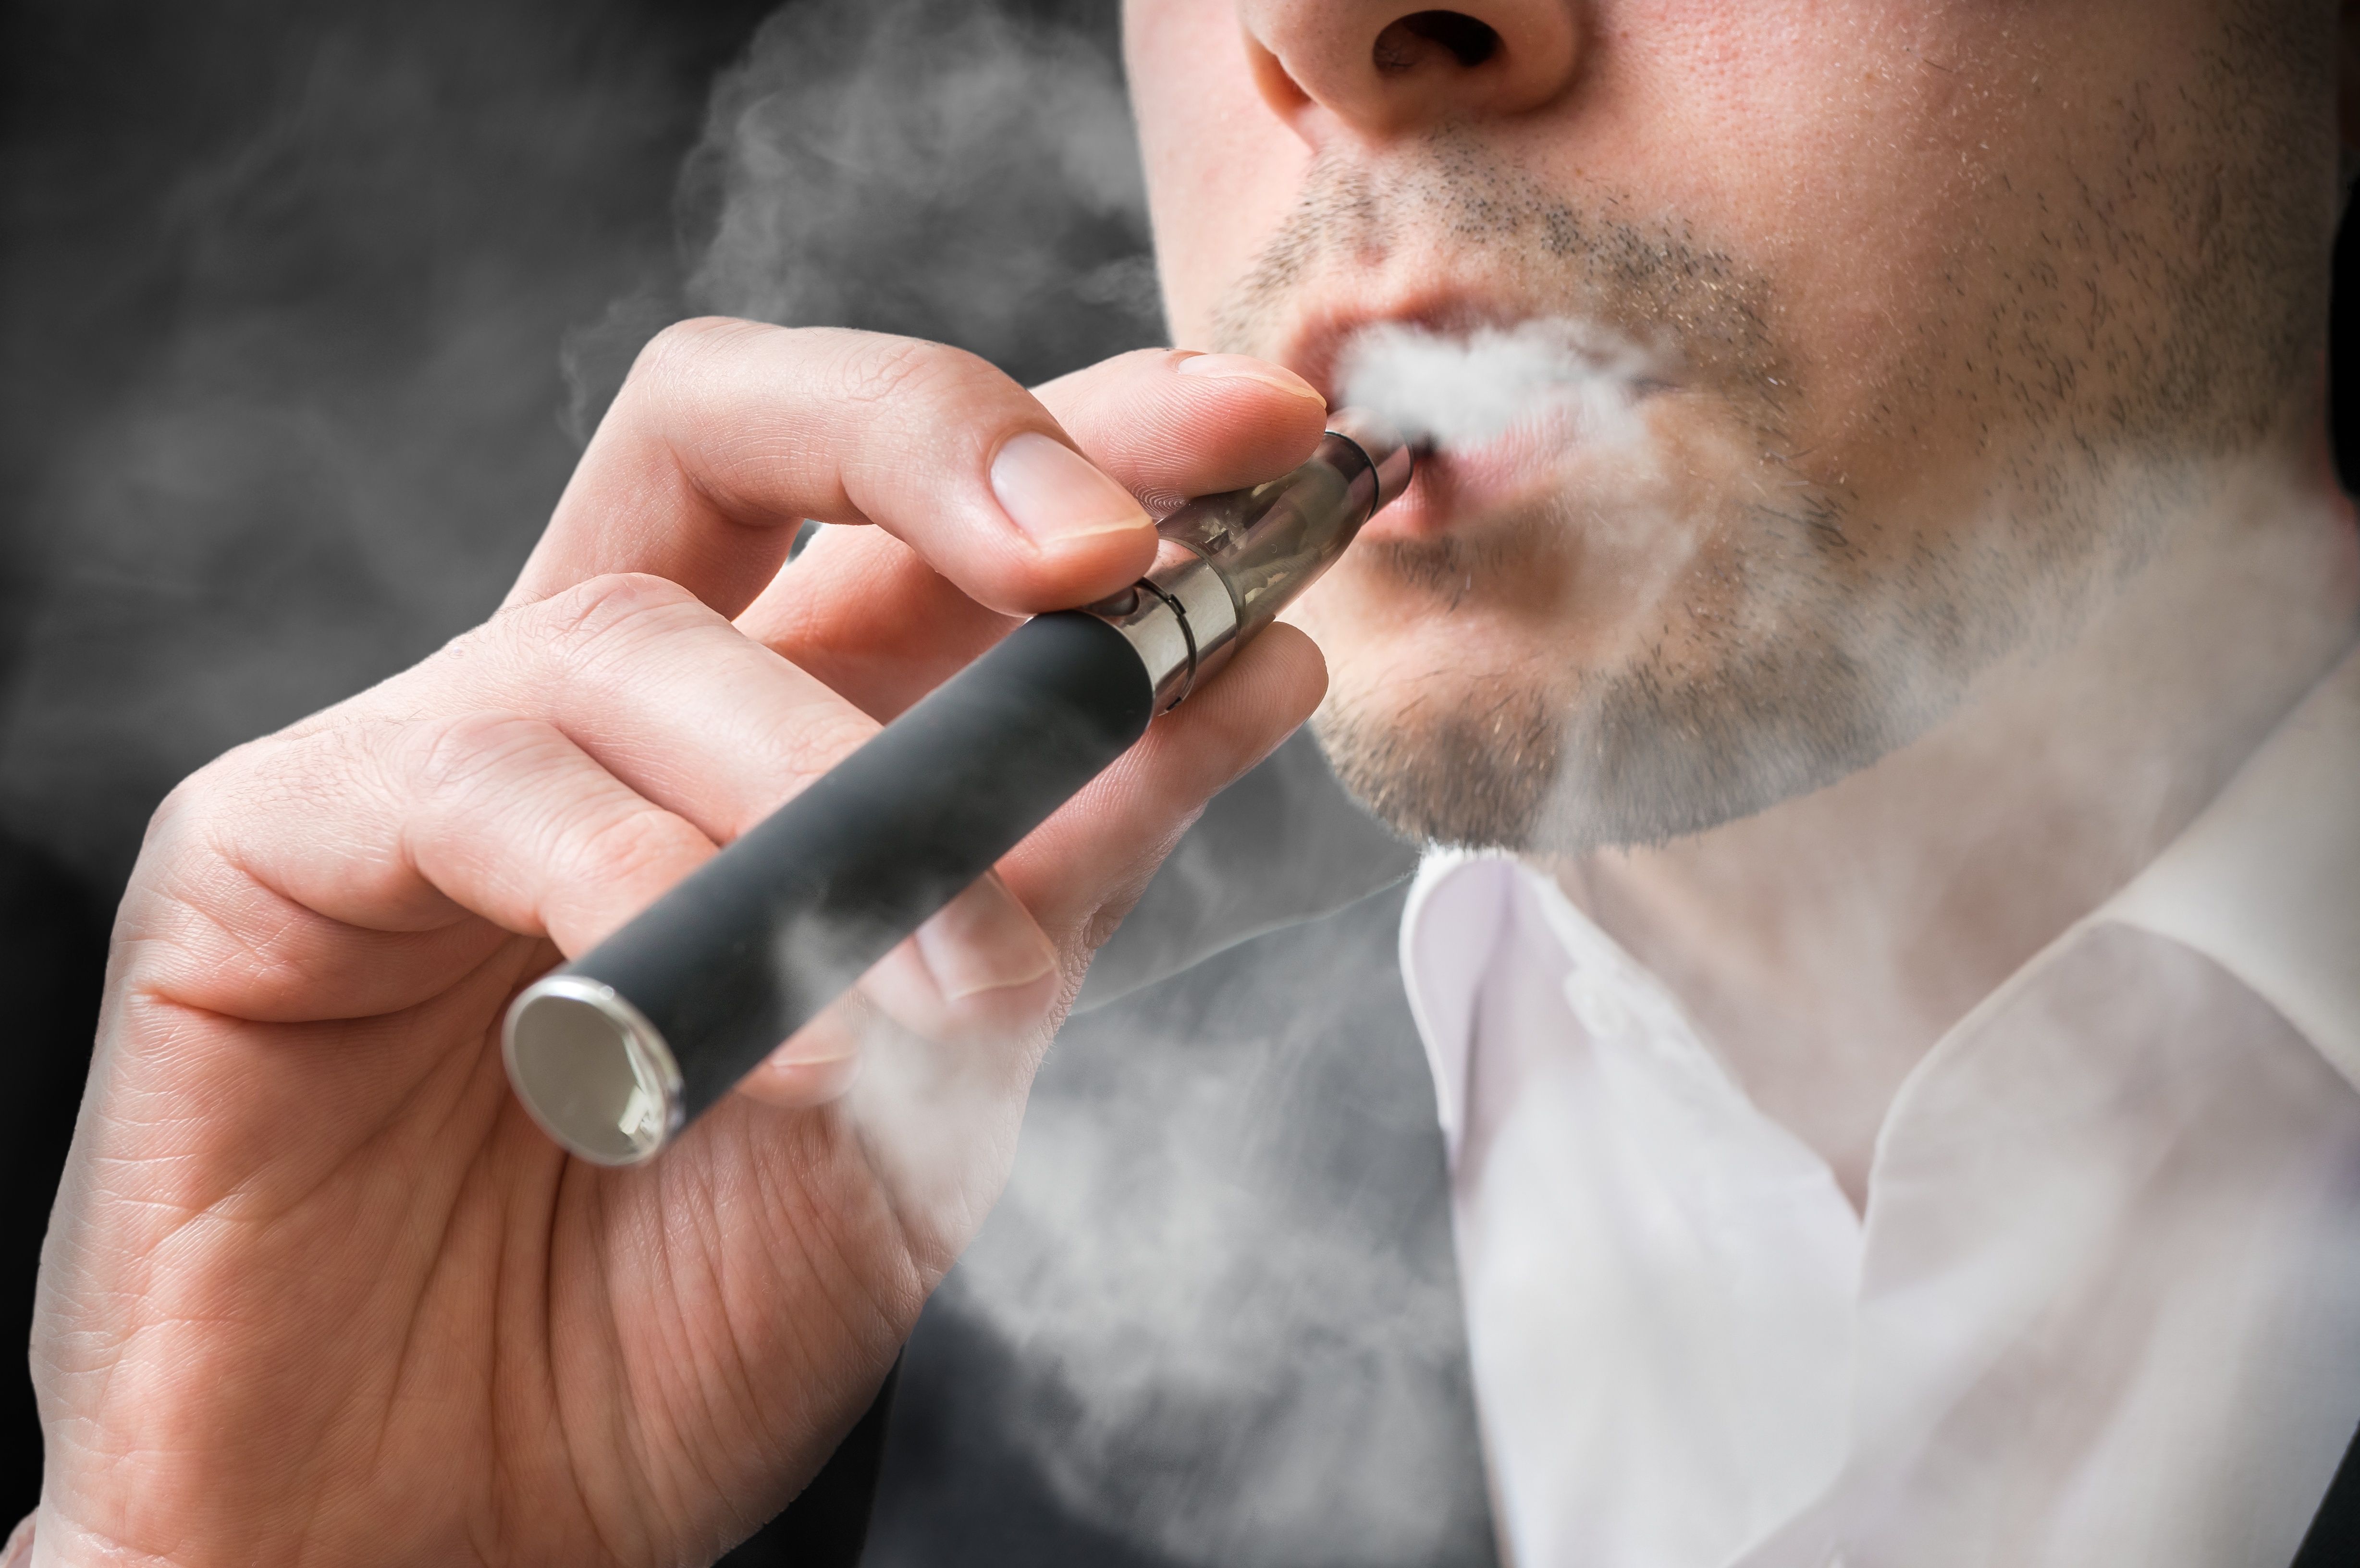 E-cigarette Use Linked to $15 Billion in Wellness Care Expenses in 2018